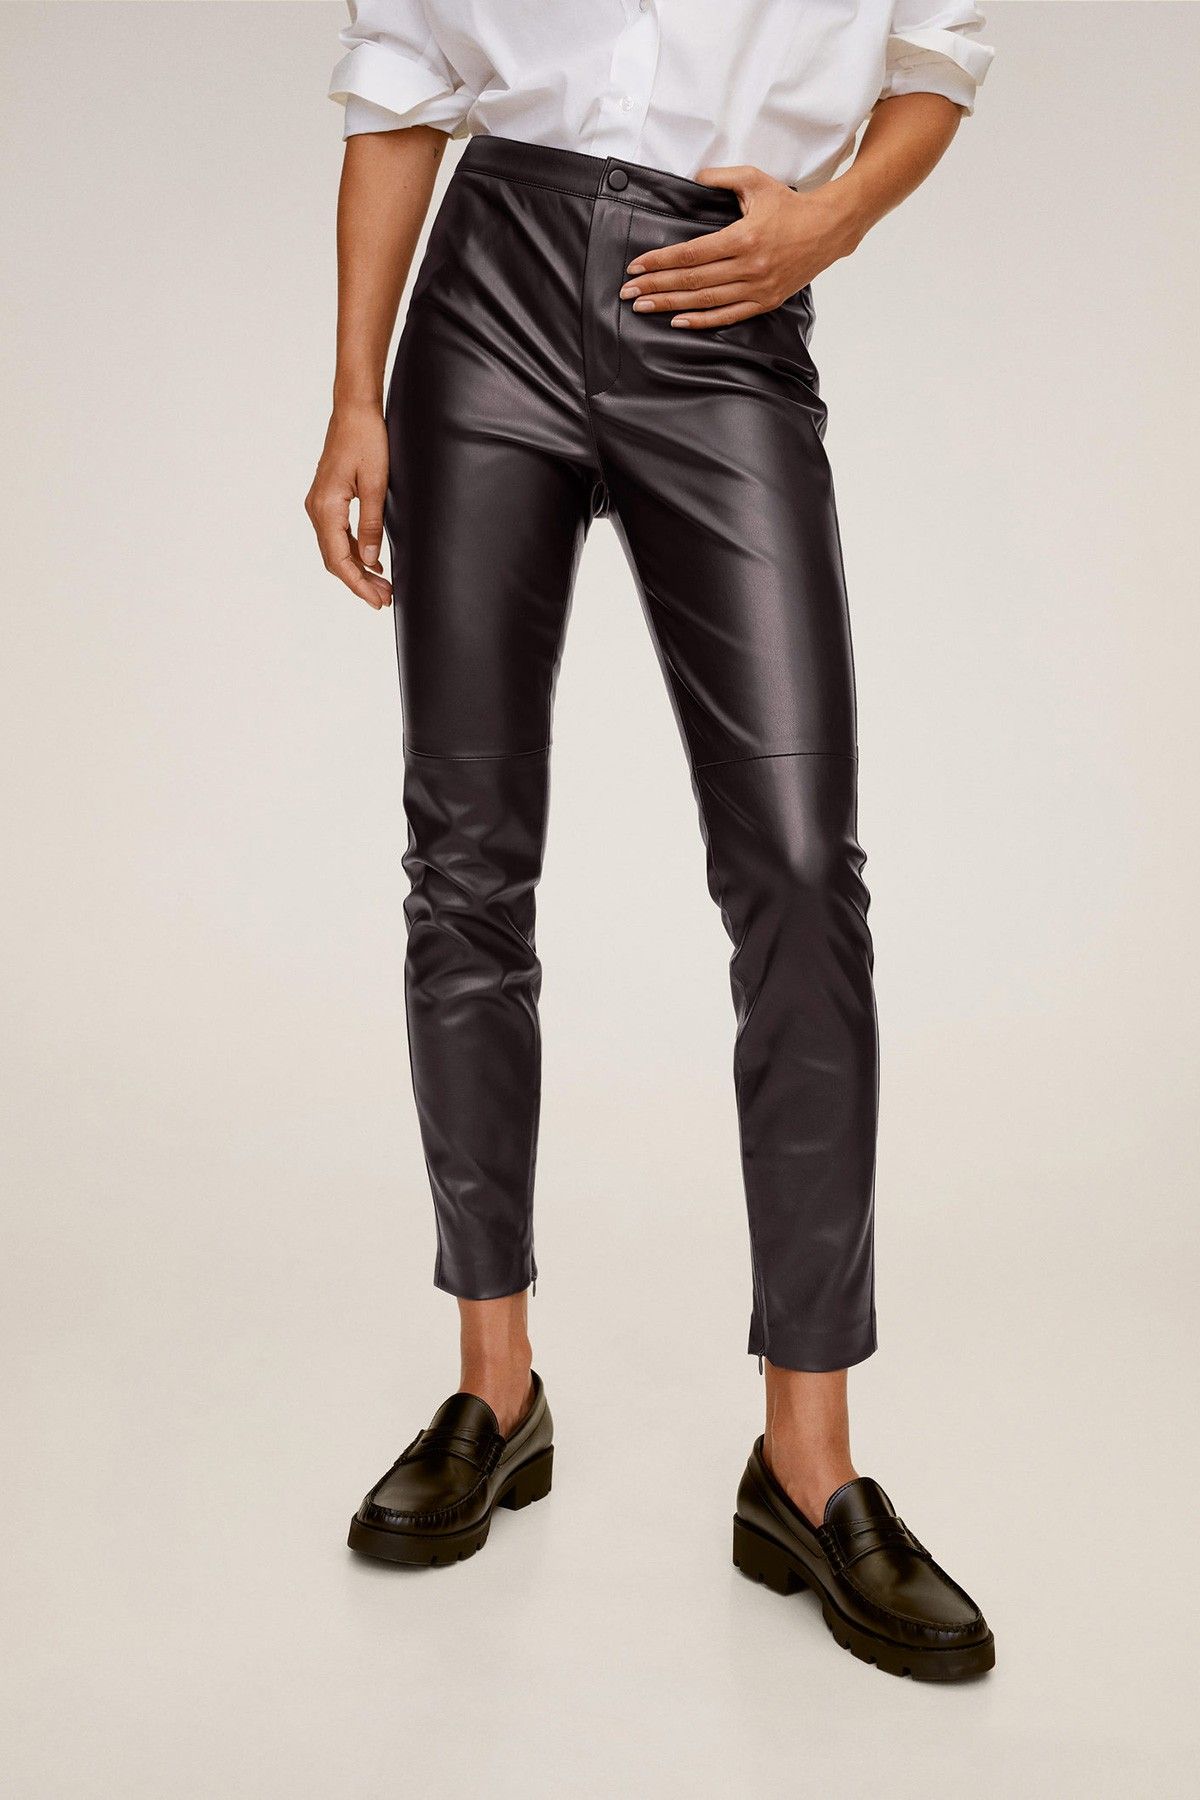 Marc Angelo Margo High Waist Coated Trousers in Wine | iCLOTHING - iCLOTHING